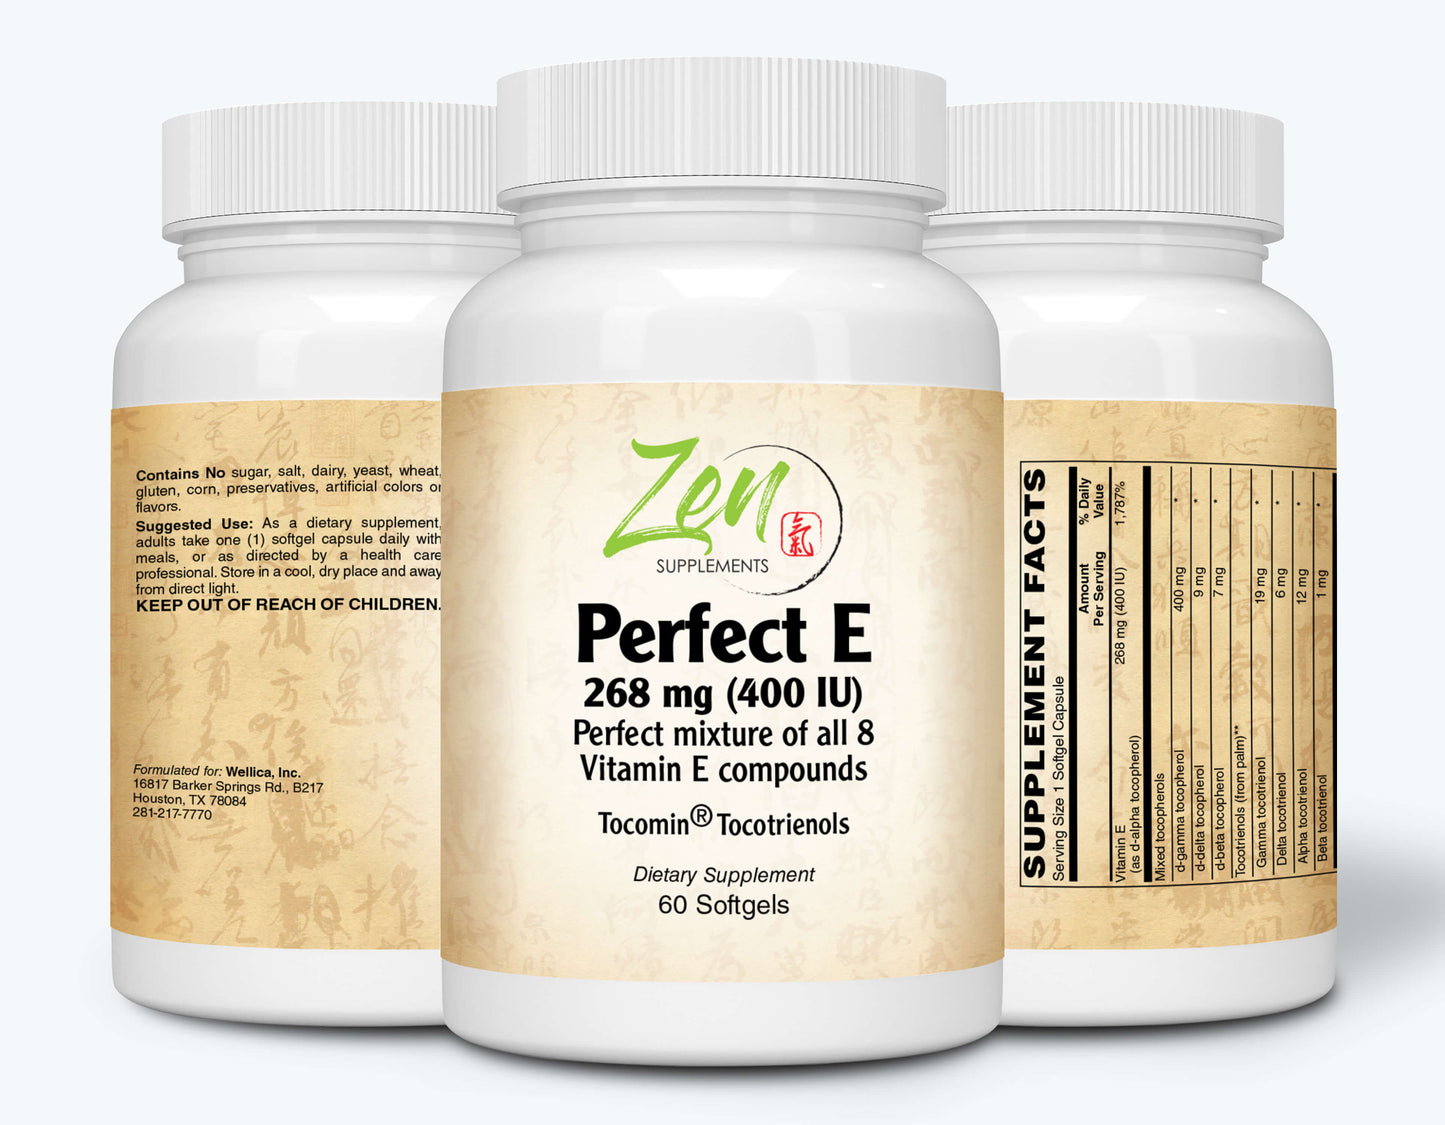 Perfect E - With Tocotrienols - 60 Softgel